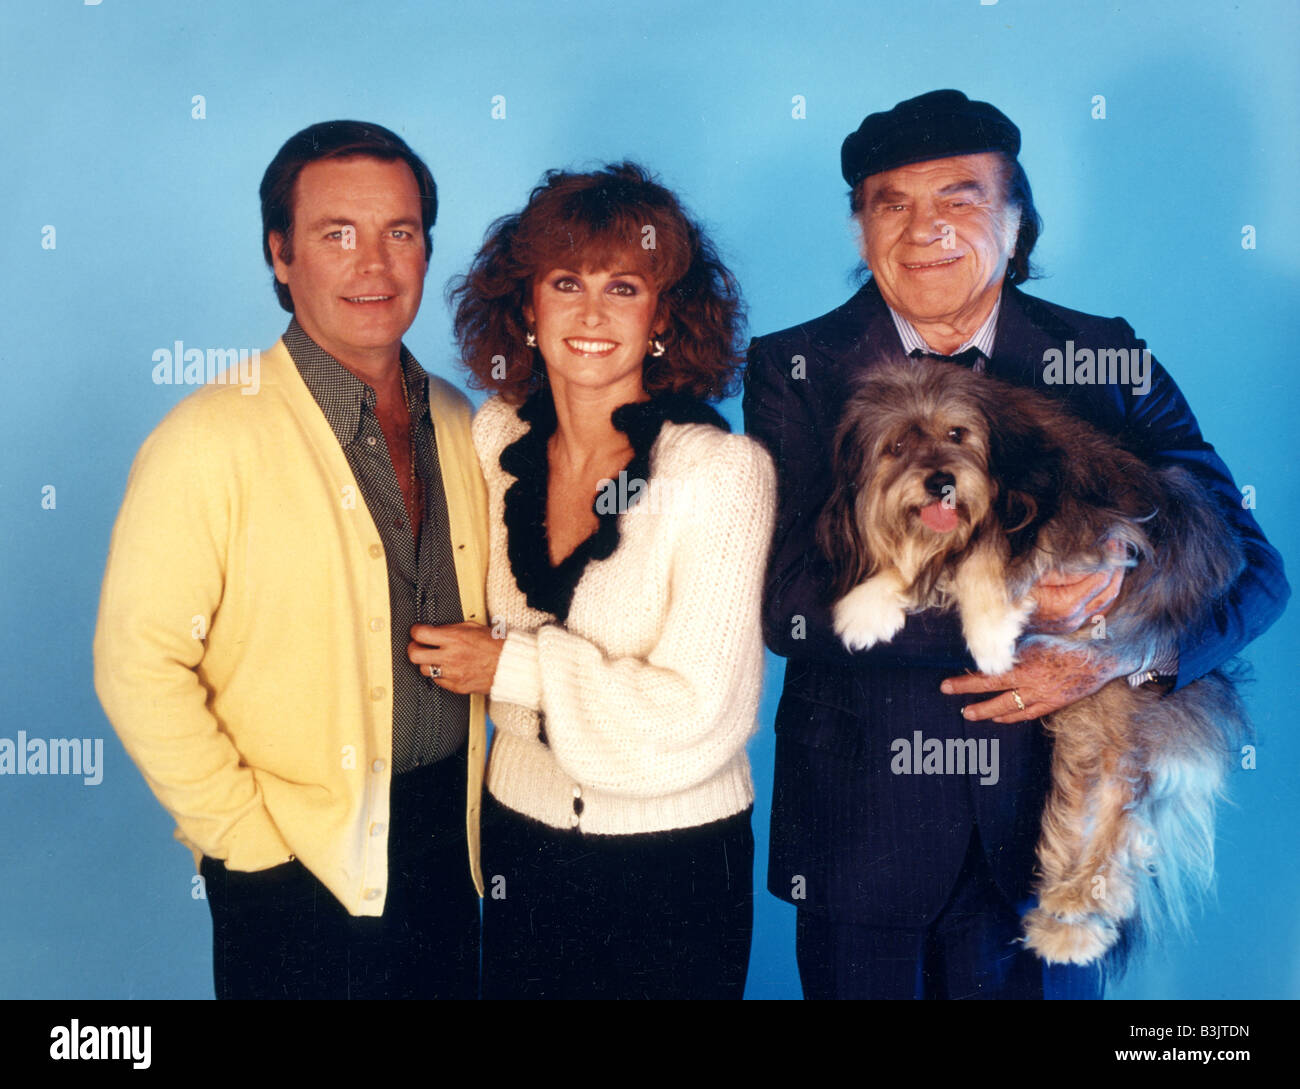 HART TO HART 1979 Columbia TV series with Robert Wagner, Stephanie Powers and Lionel Stander at right Stock Photo